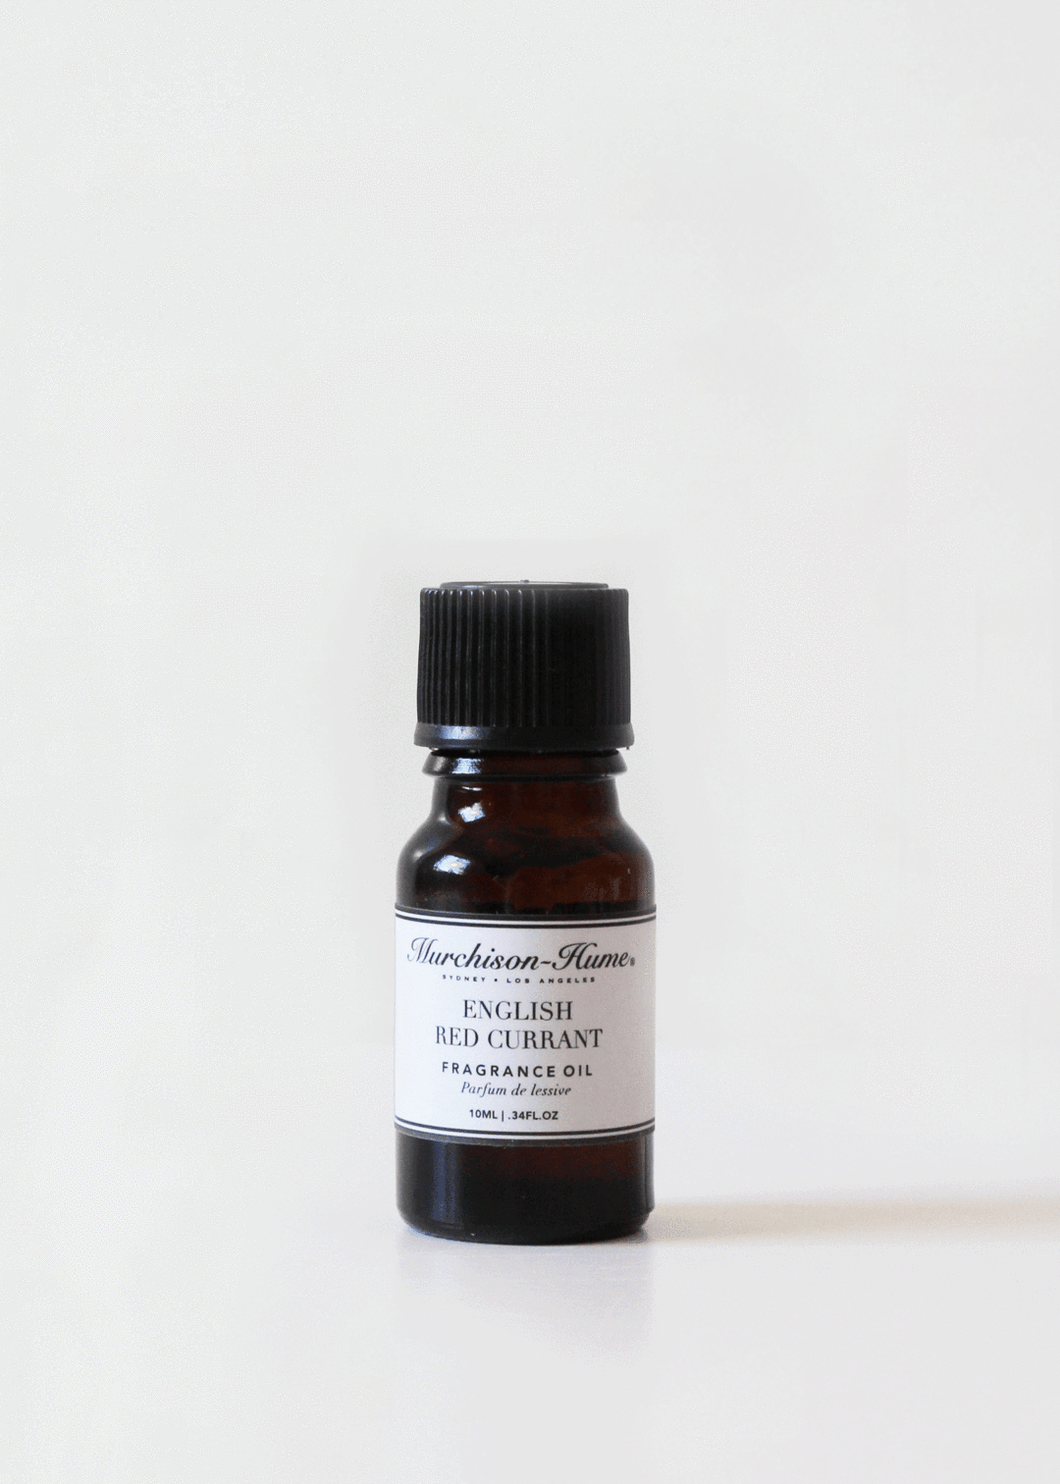 Murchison-Hume English Red Currant Fragrance Oil